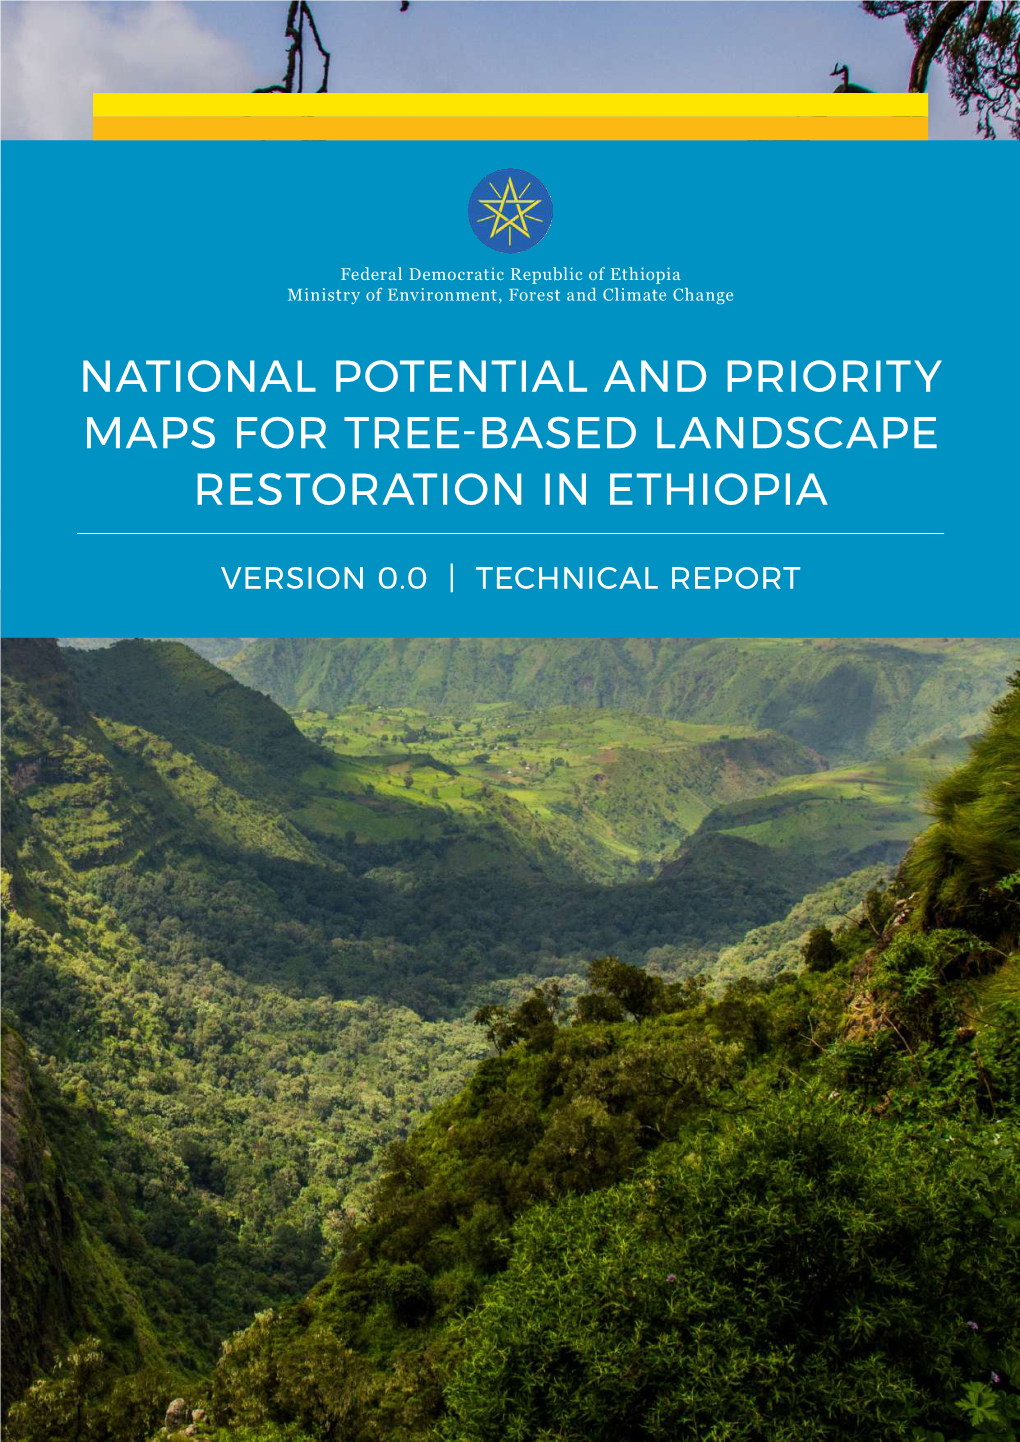 National Potential and Priority Maps for Tree-Based Landscape Restoration in Ethiopia